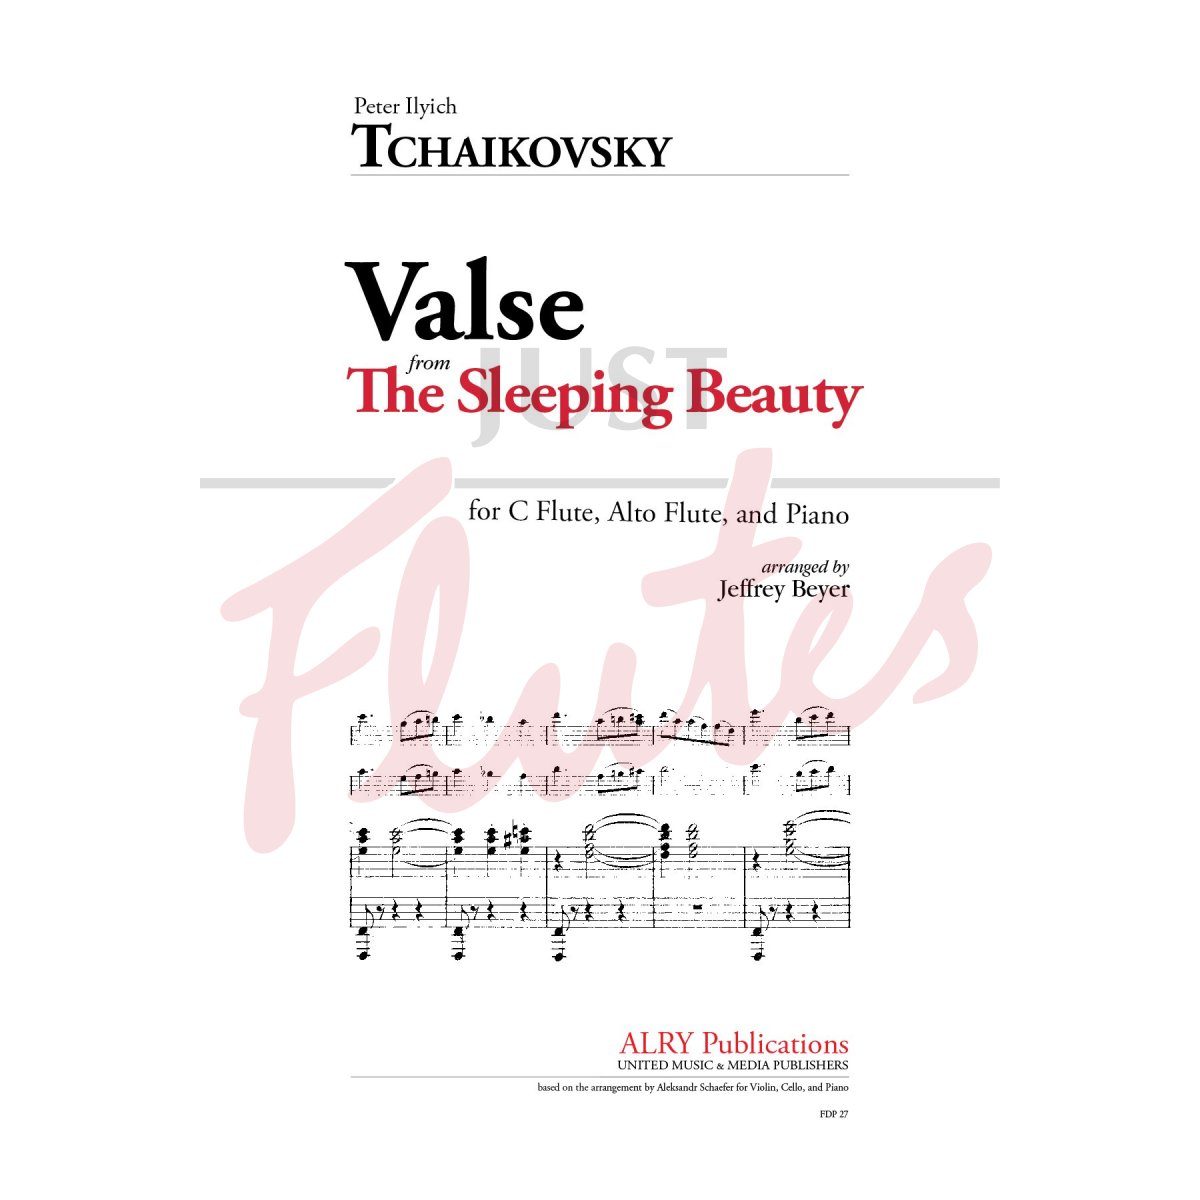 Valse from The Sleeping Beauty for Flute, Alto Flute and Piano